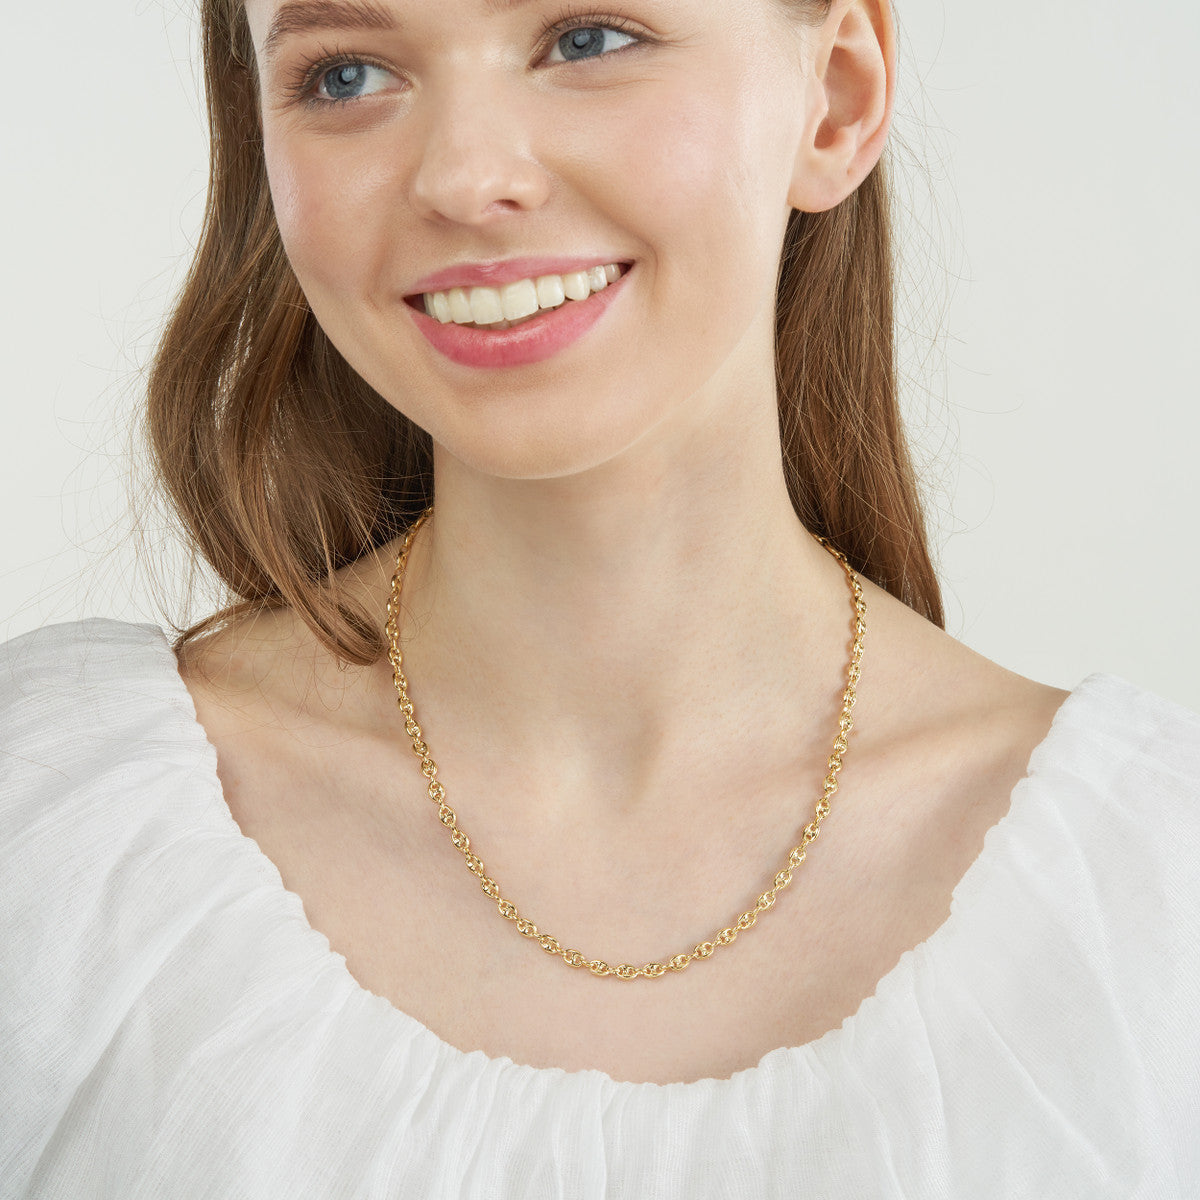 14k Yellow Gold Puff Mariner Chain Necklace on woman's neck